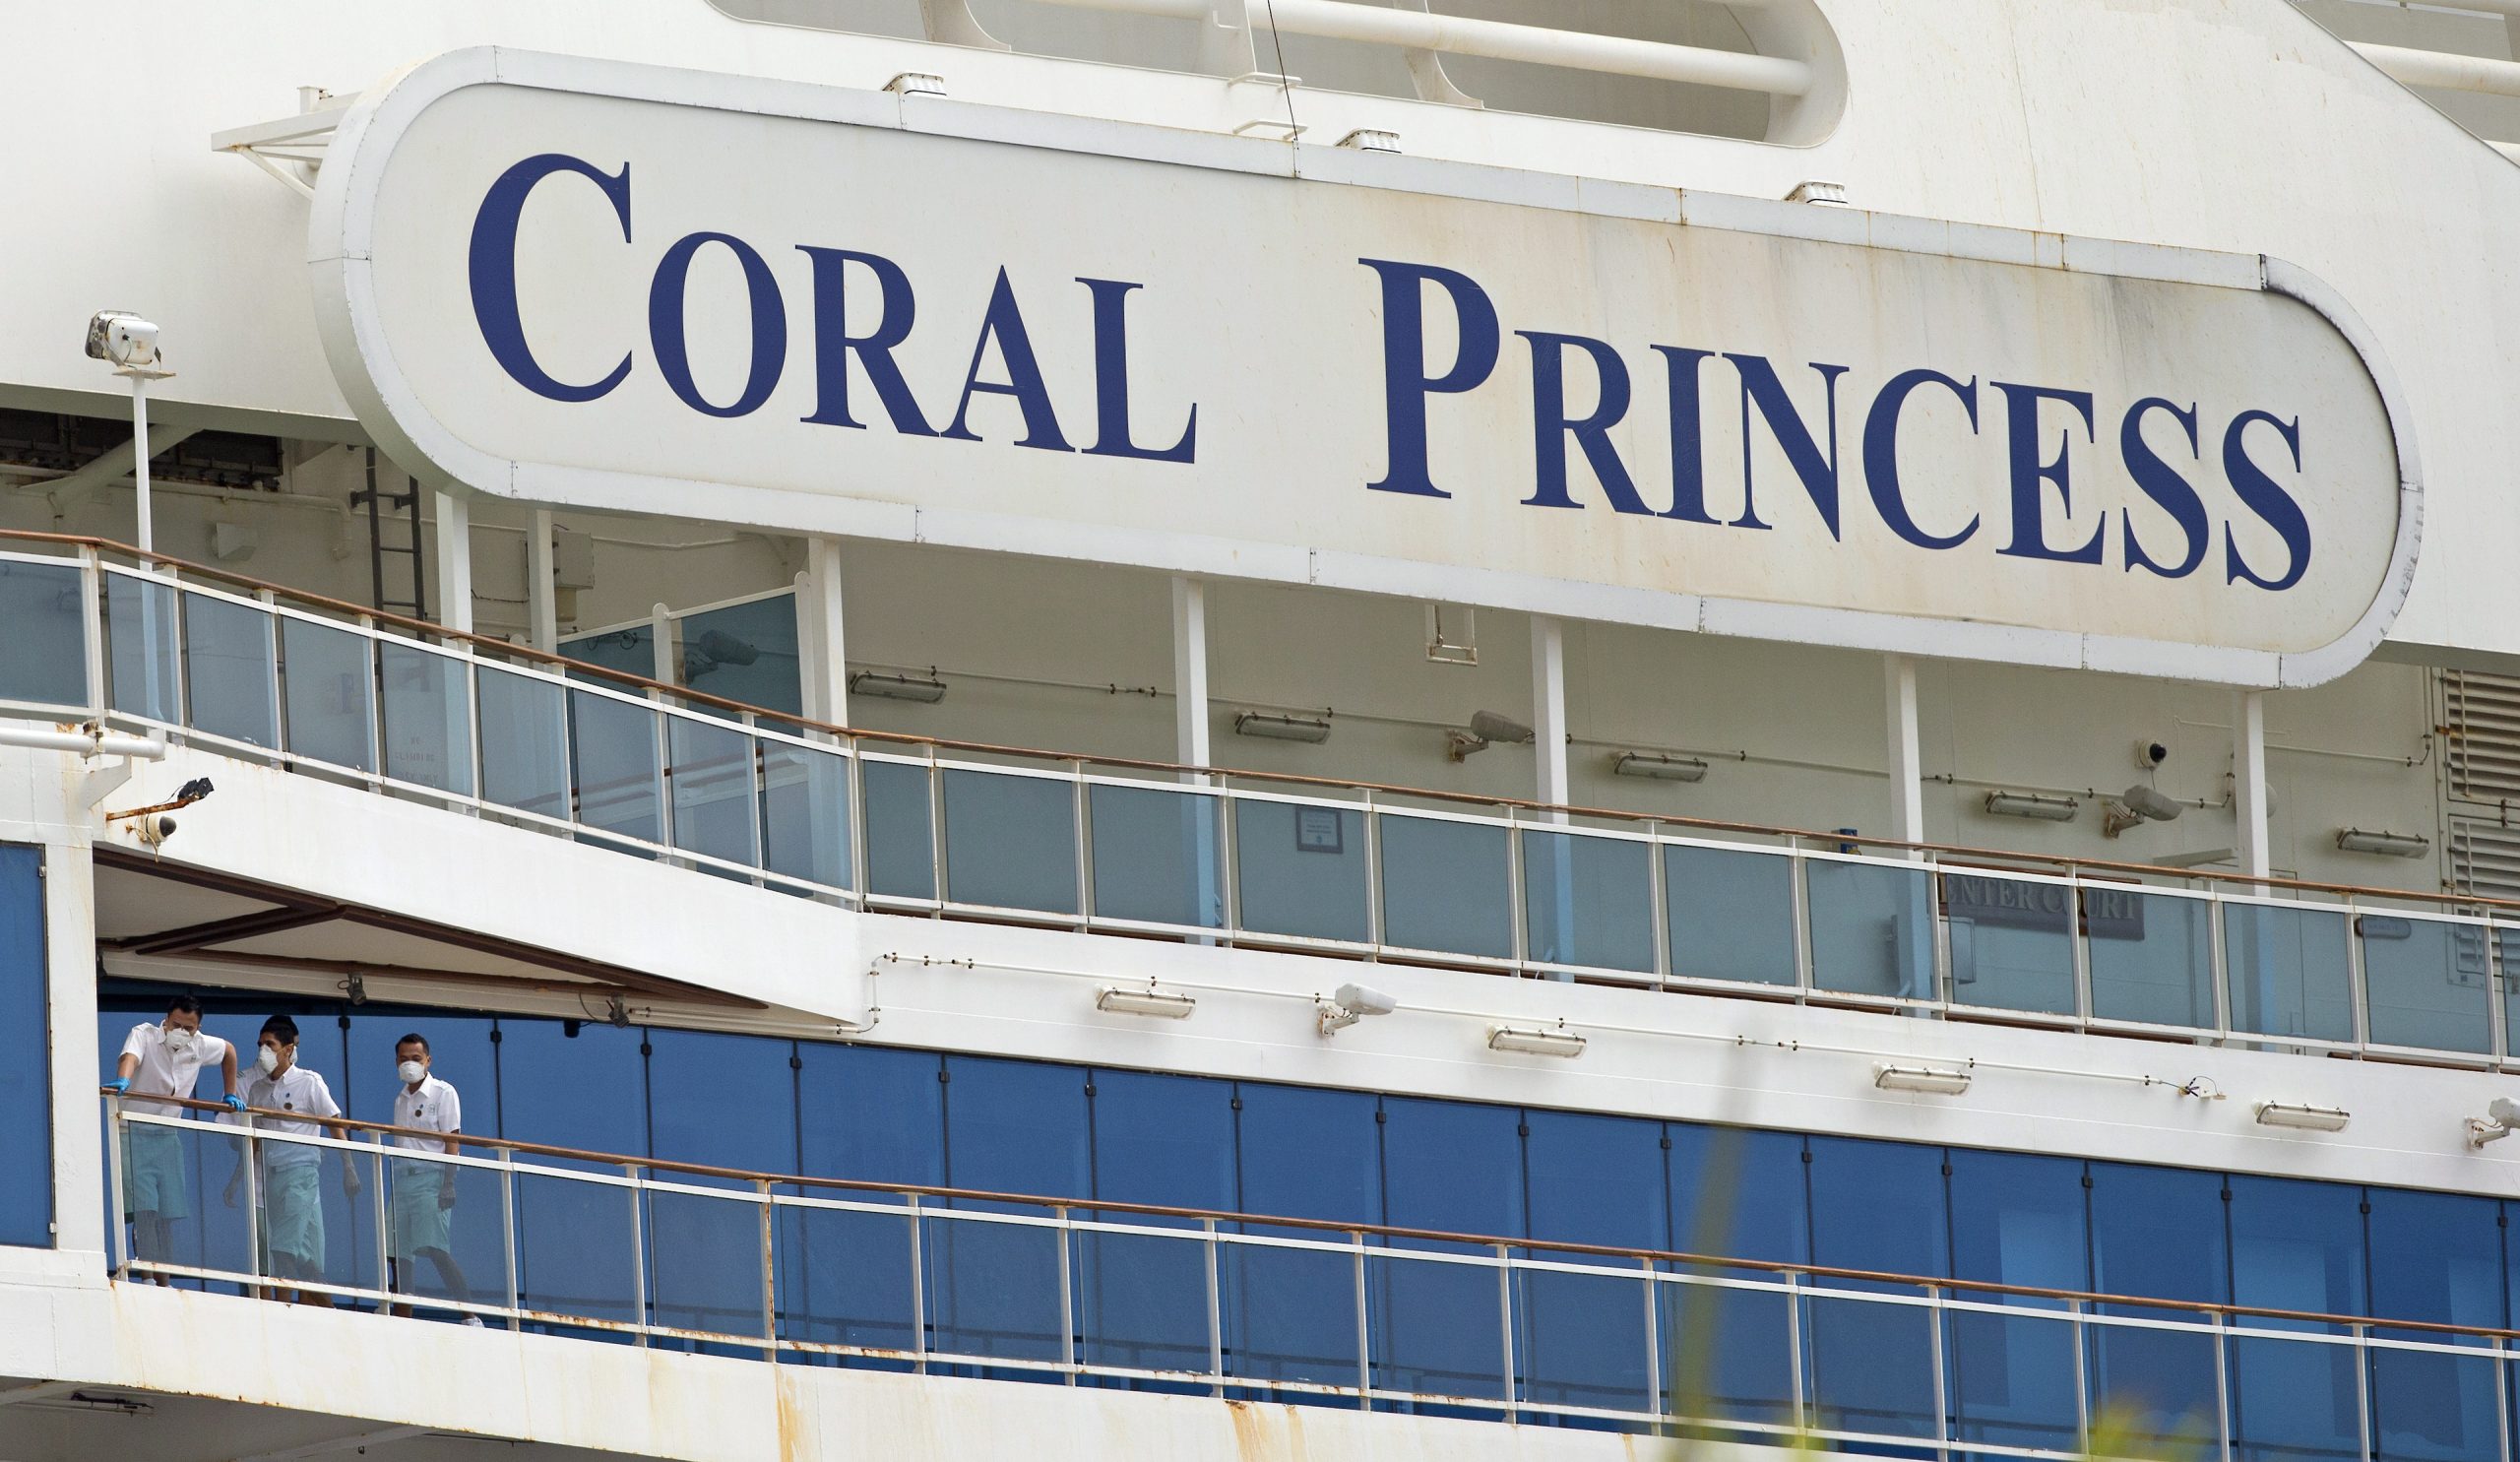 Canadians not allowed off Coral Princess ship due to new CDC guidelines